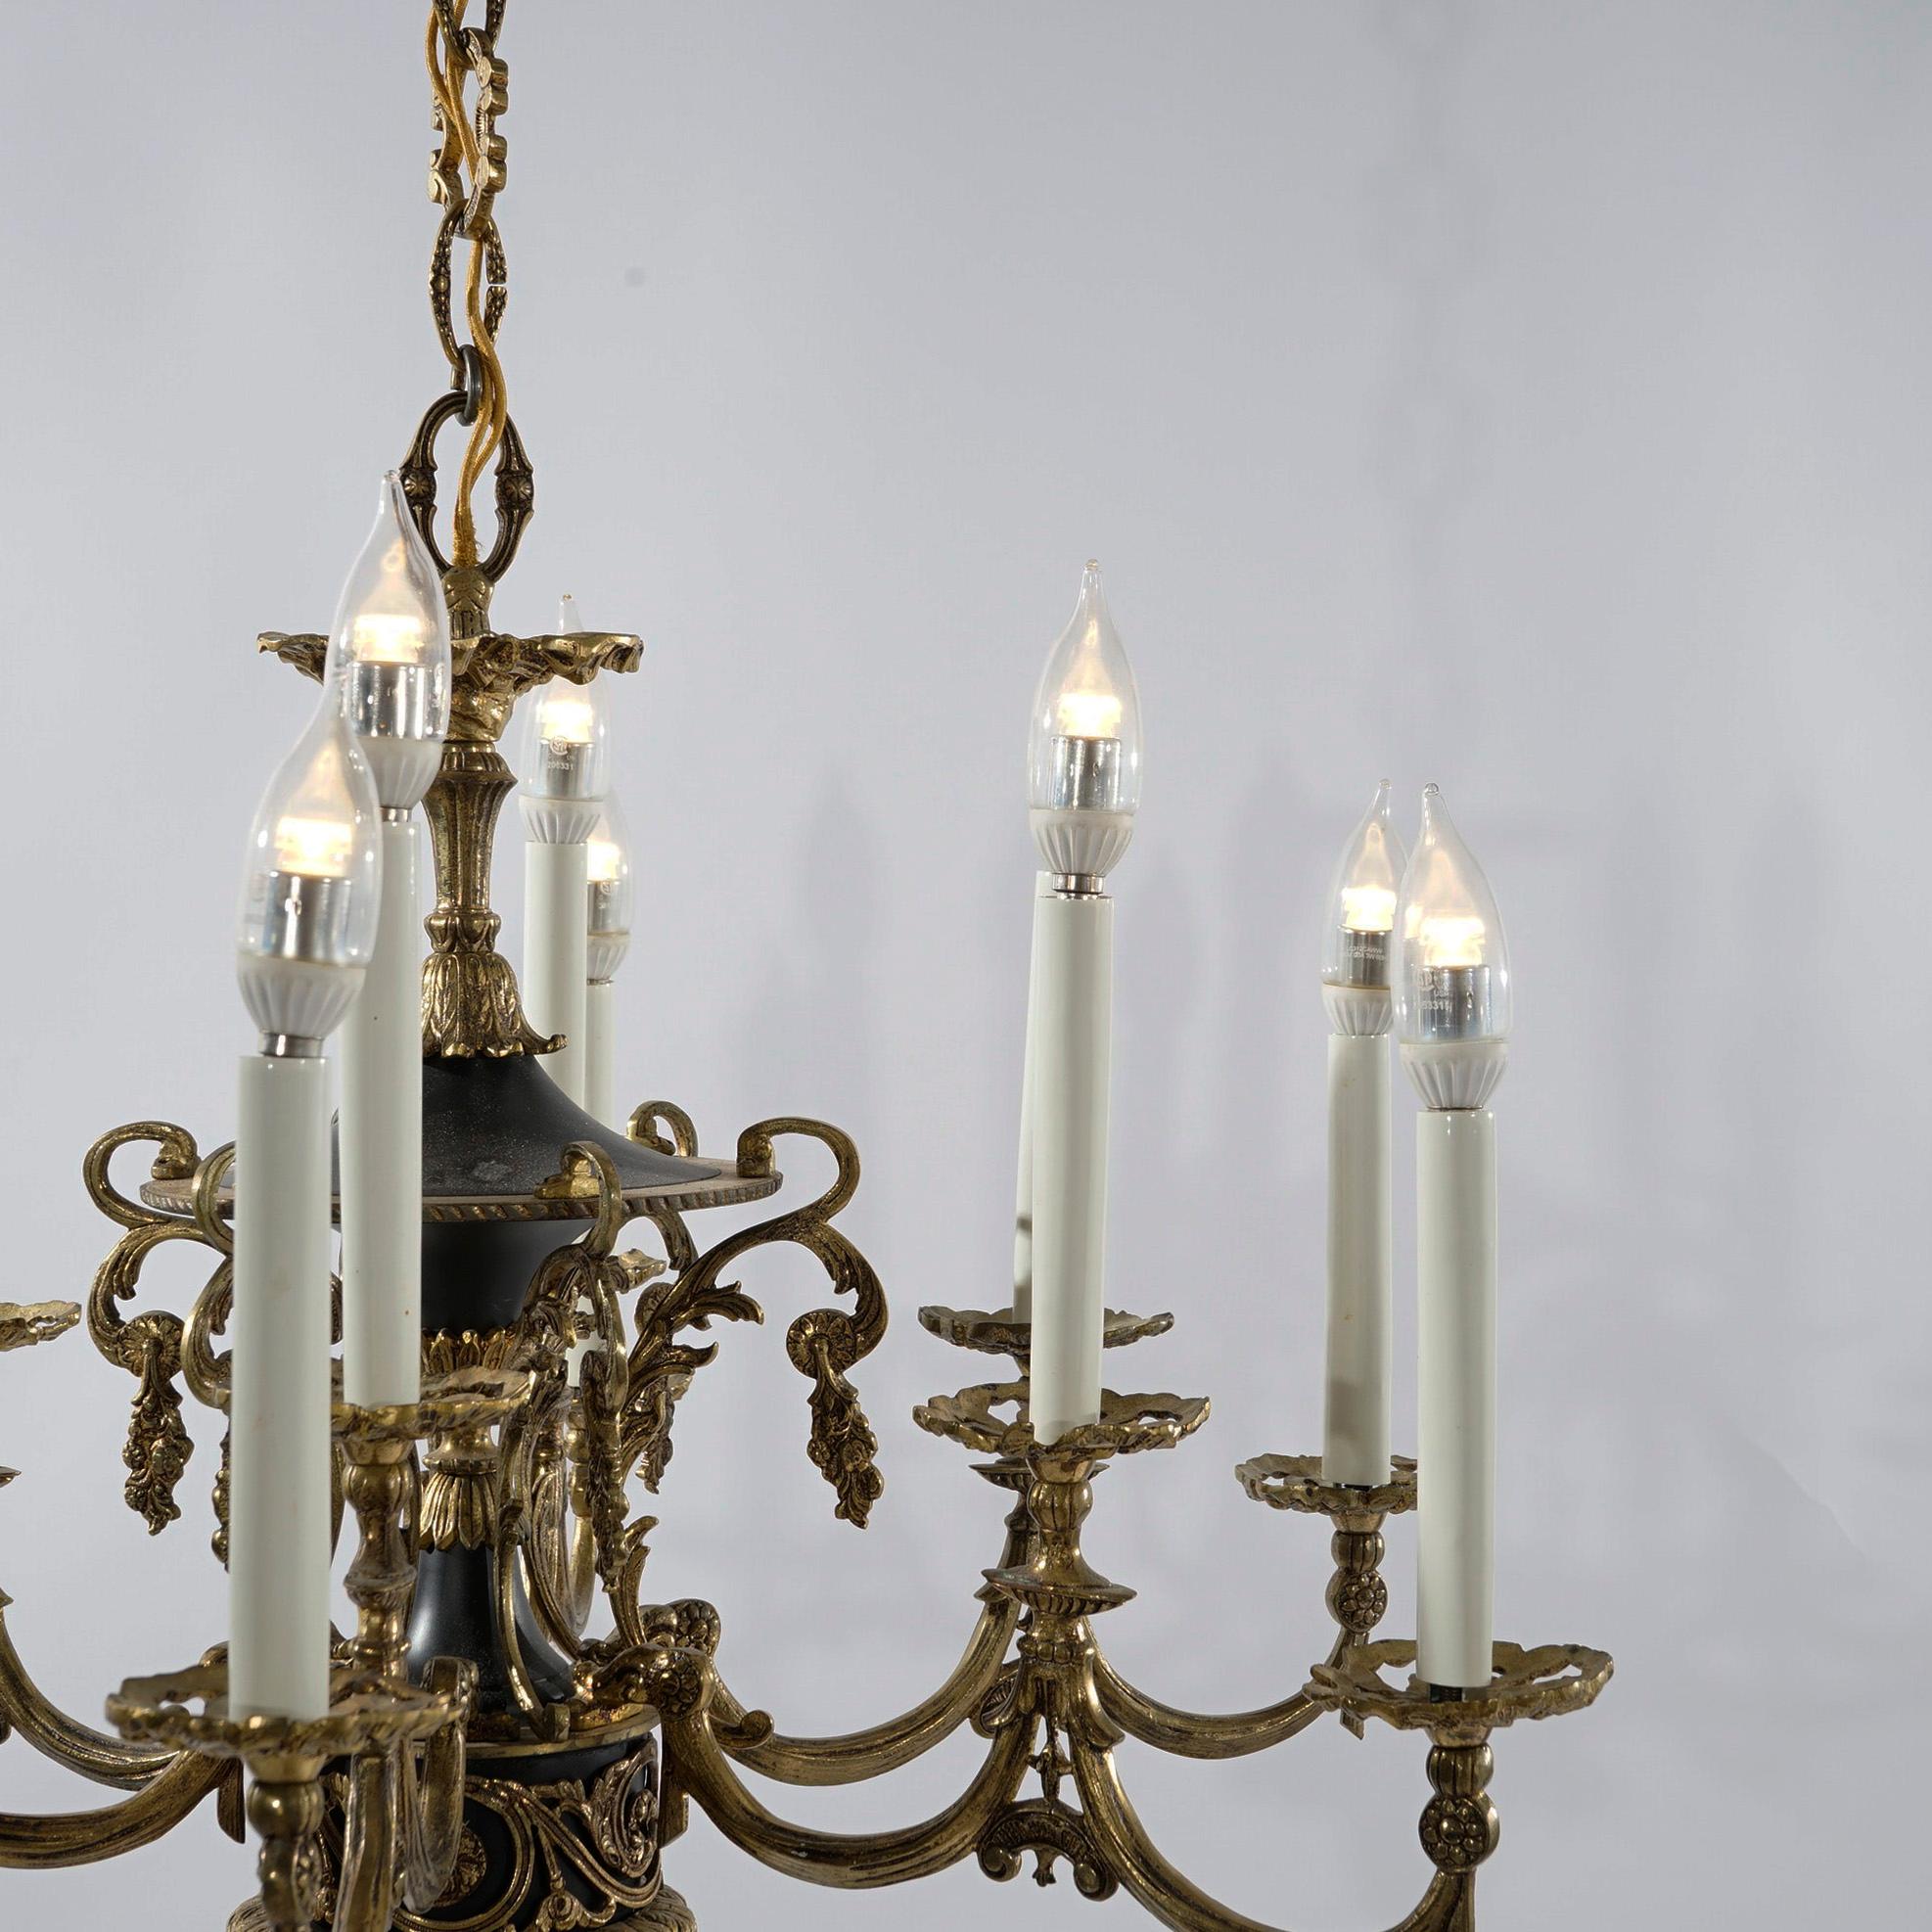 Antique French Empire Style Ebonized Bronze Twelve-Light Chandelier, Early 20thC For Sale 5